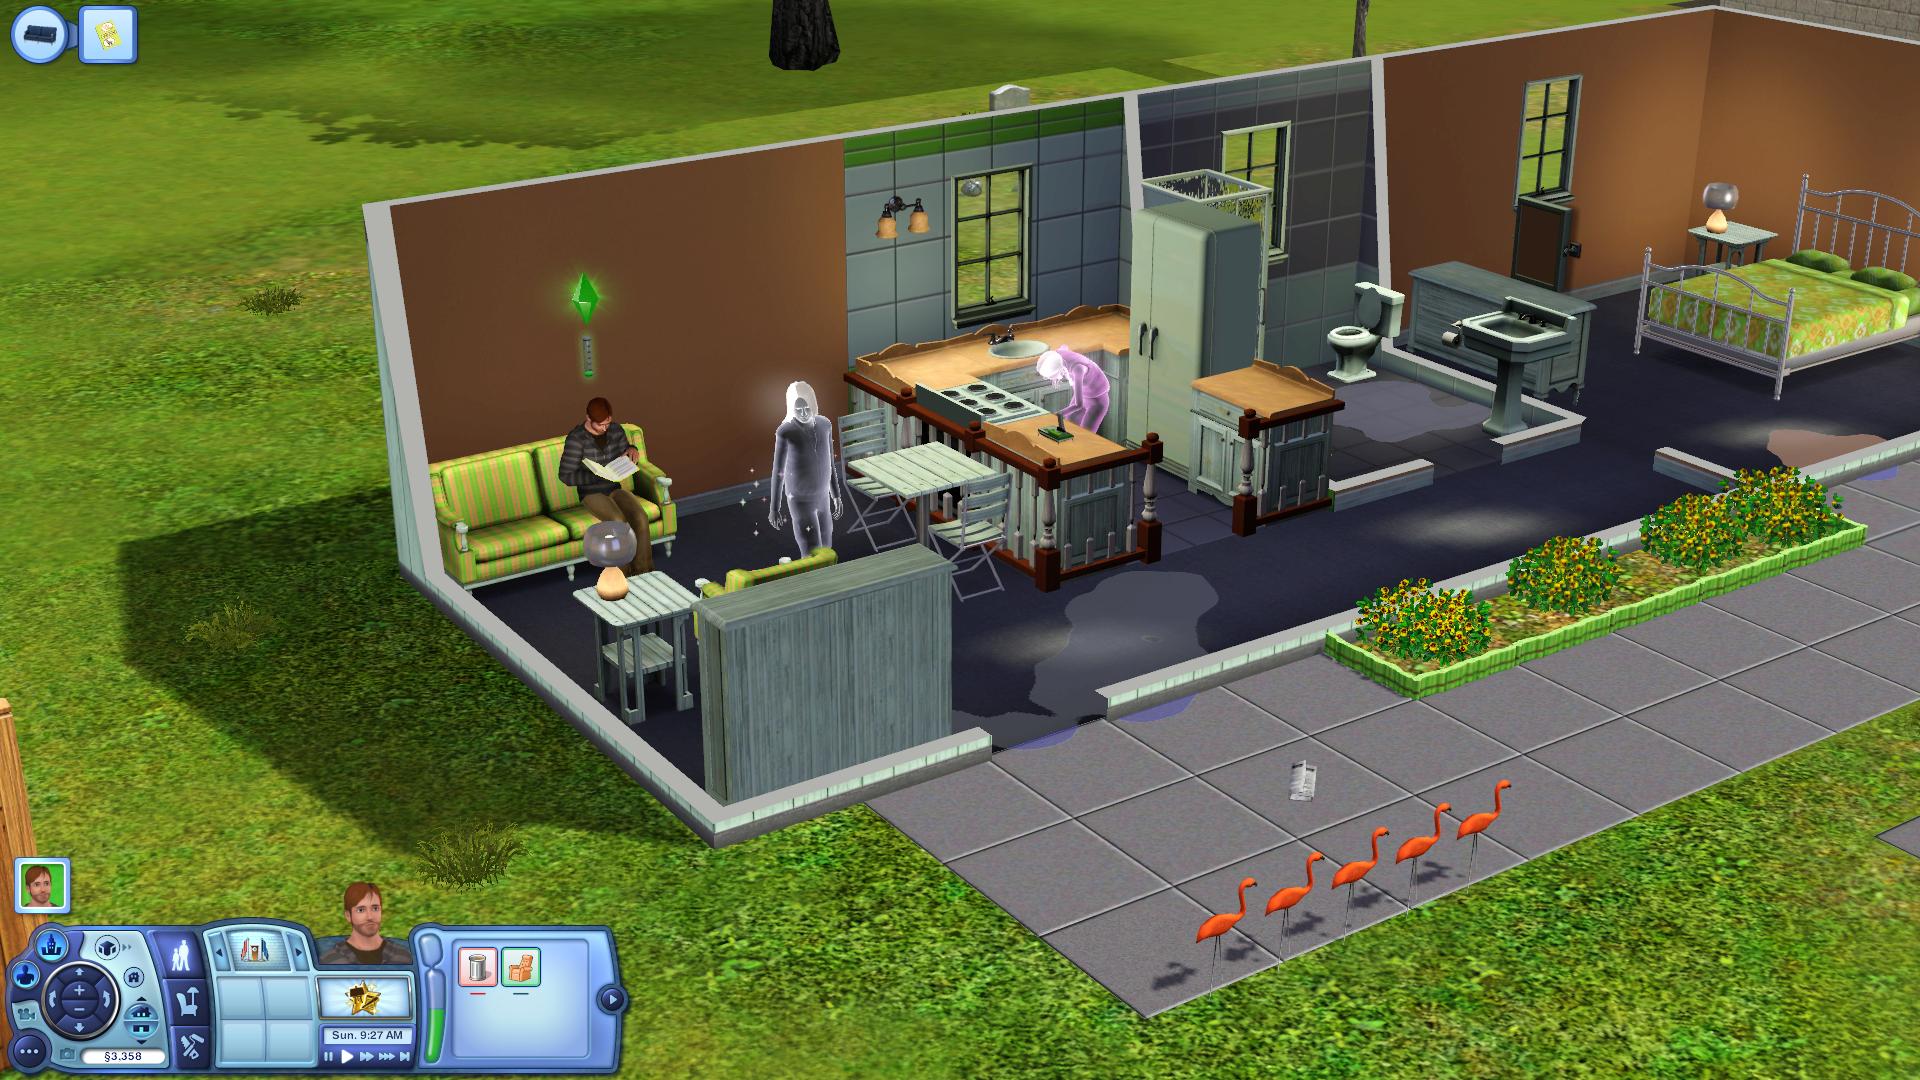 The Sims 3 For Mac free. download full Game